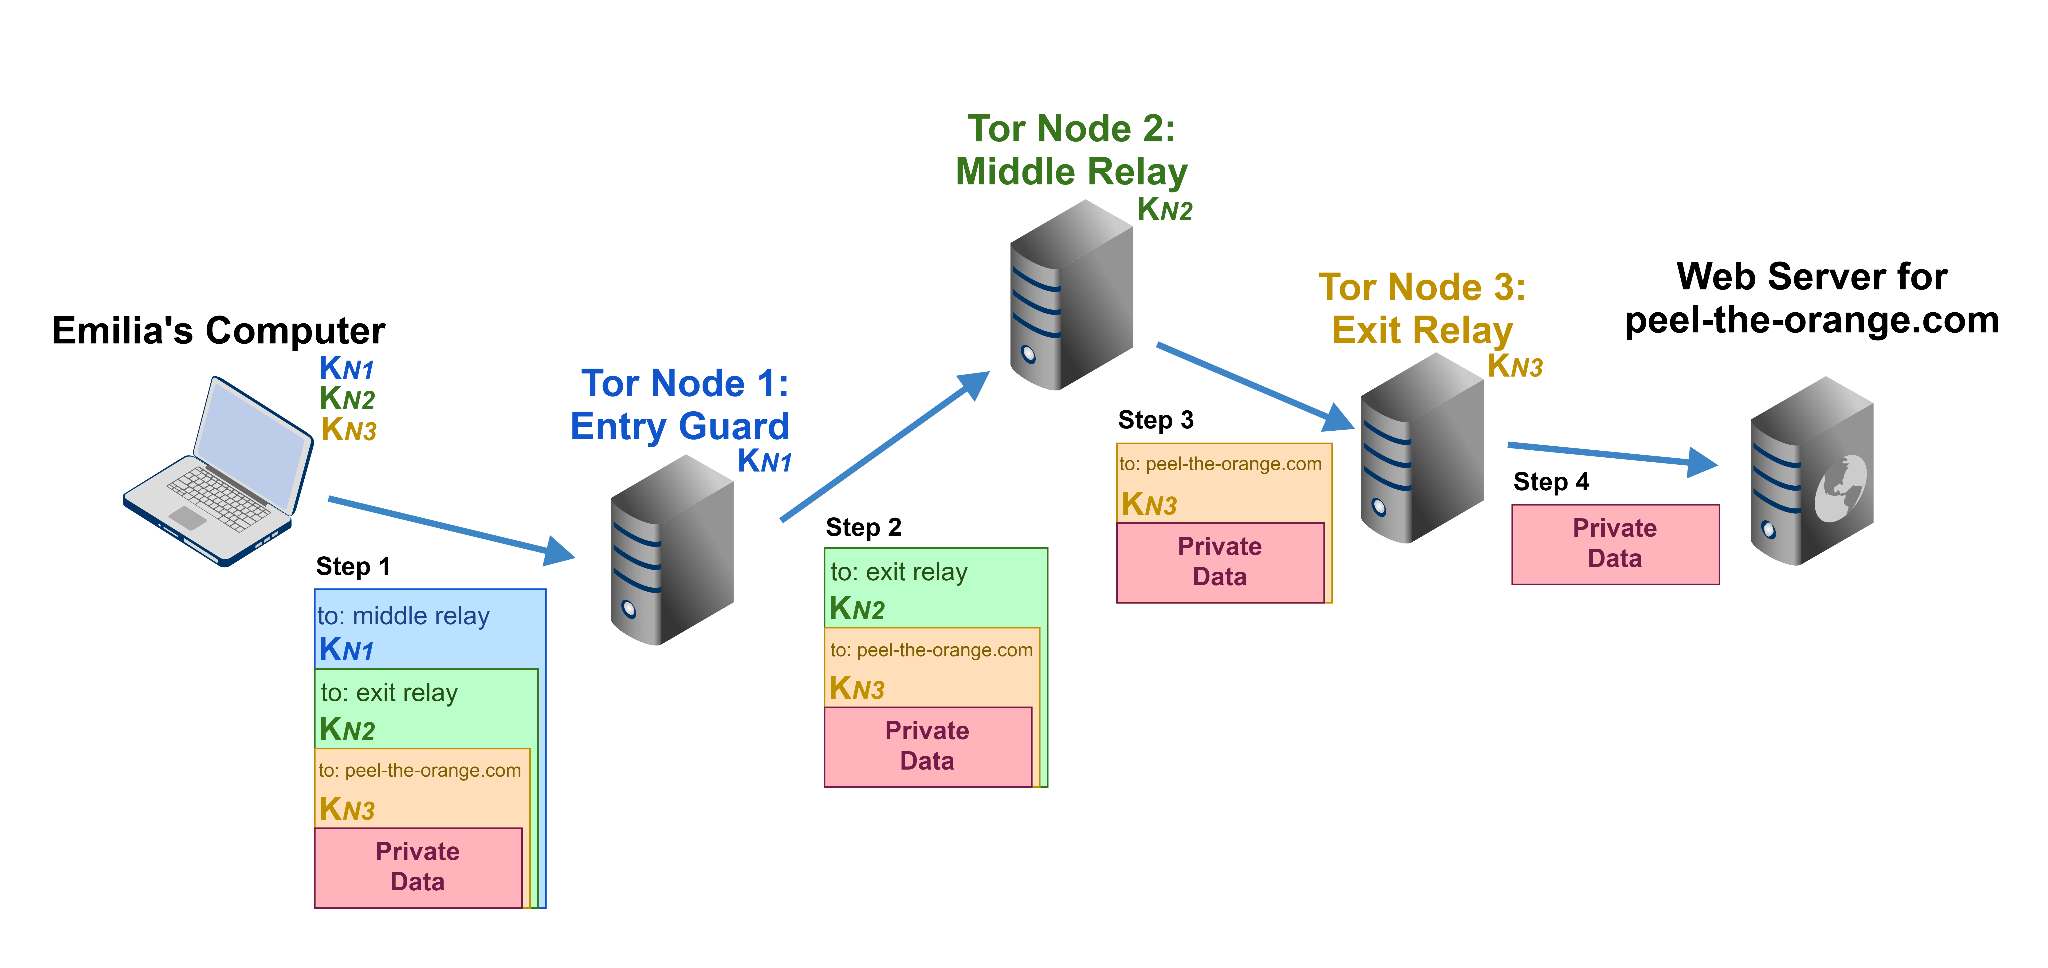 Emilia's computer > Step 1 to middle relay KN1 to exit relay KN2 to peel-the-orange KN3 private data > Tor Node 1: Entry Guard KN1 > Step 2 to exit relay KN2 to peel-the-orange KN3 private data > Tor Node 2: Middle Relay KN2 > Step 3 to peel-the-orange KN3 private data > Tor Node 3: Exit Relay KN3 > Step 4 Private data > Web server for peel-the-orange